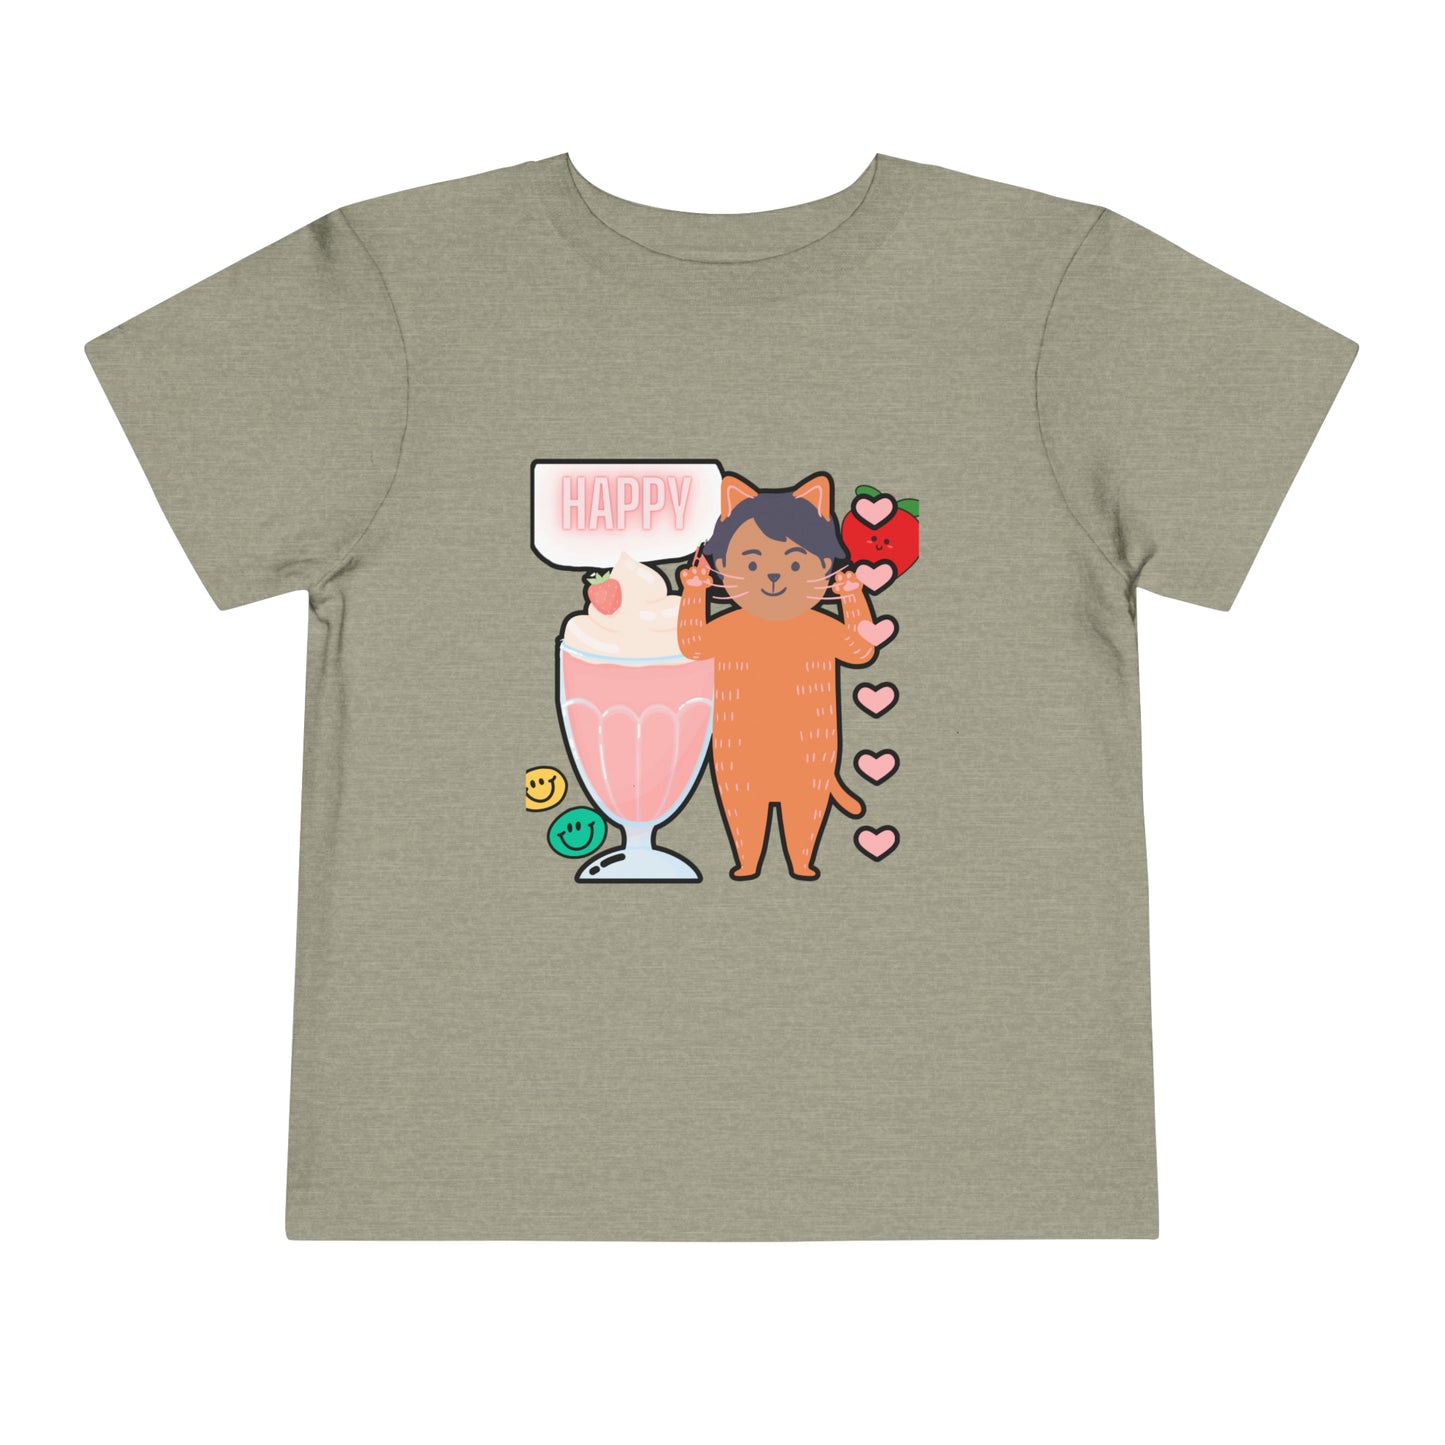 Adorable Toddler T-Shirt: Love is Purrrfect with Cute Cat and Milkshake Design